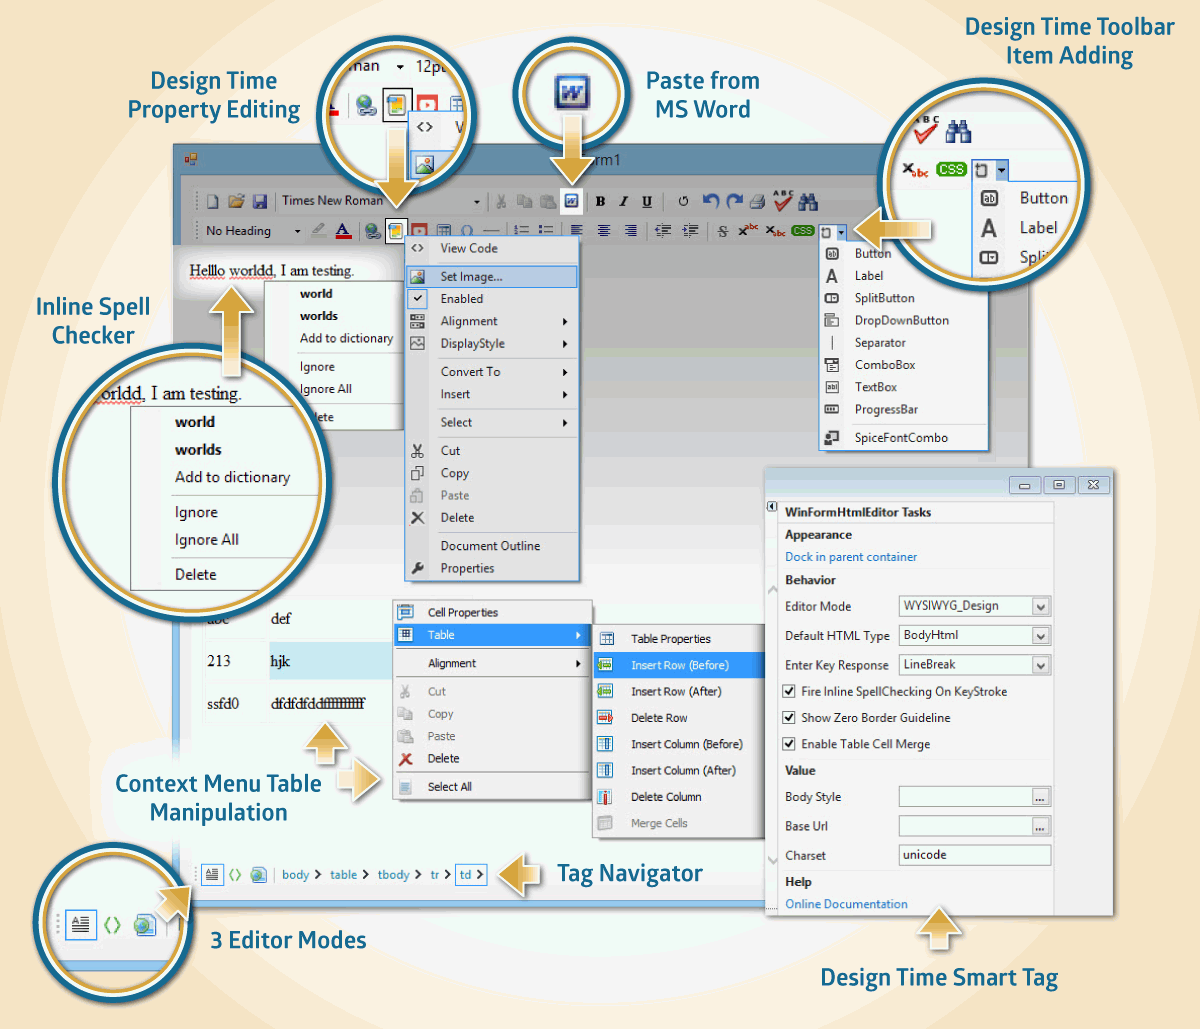 Spicelogic .NET WinForms HTML Editor Control 7.4.11.0 Direct Link Download